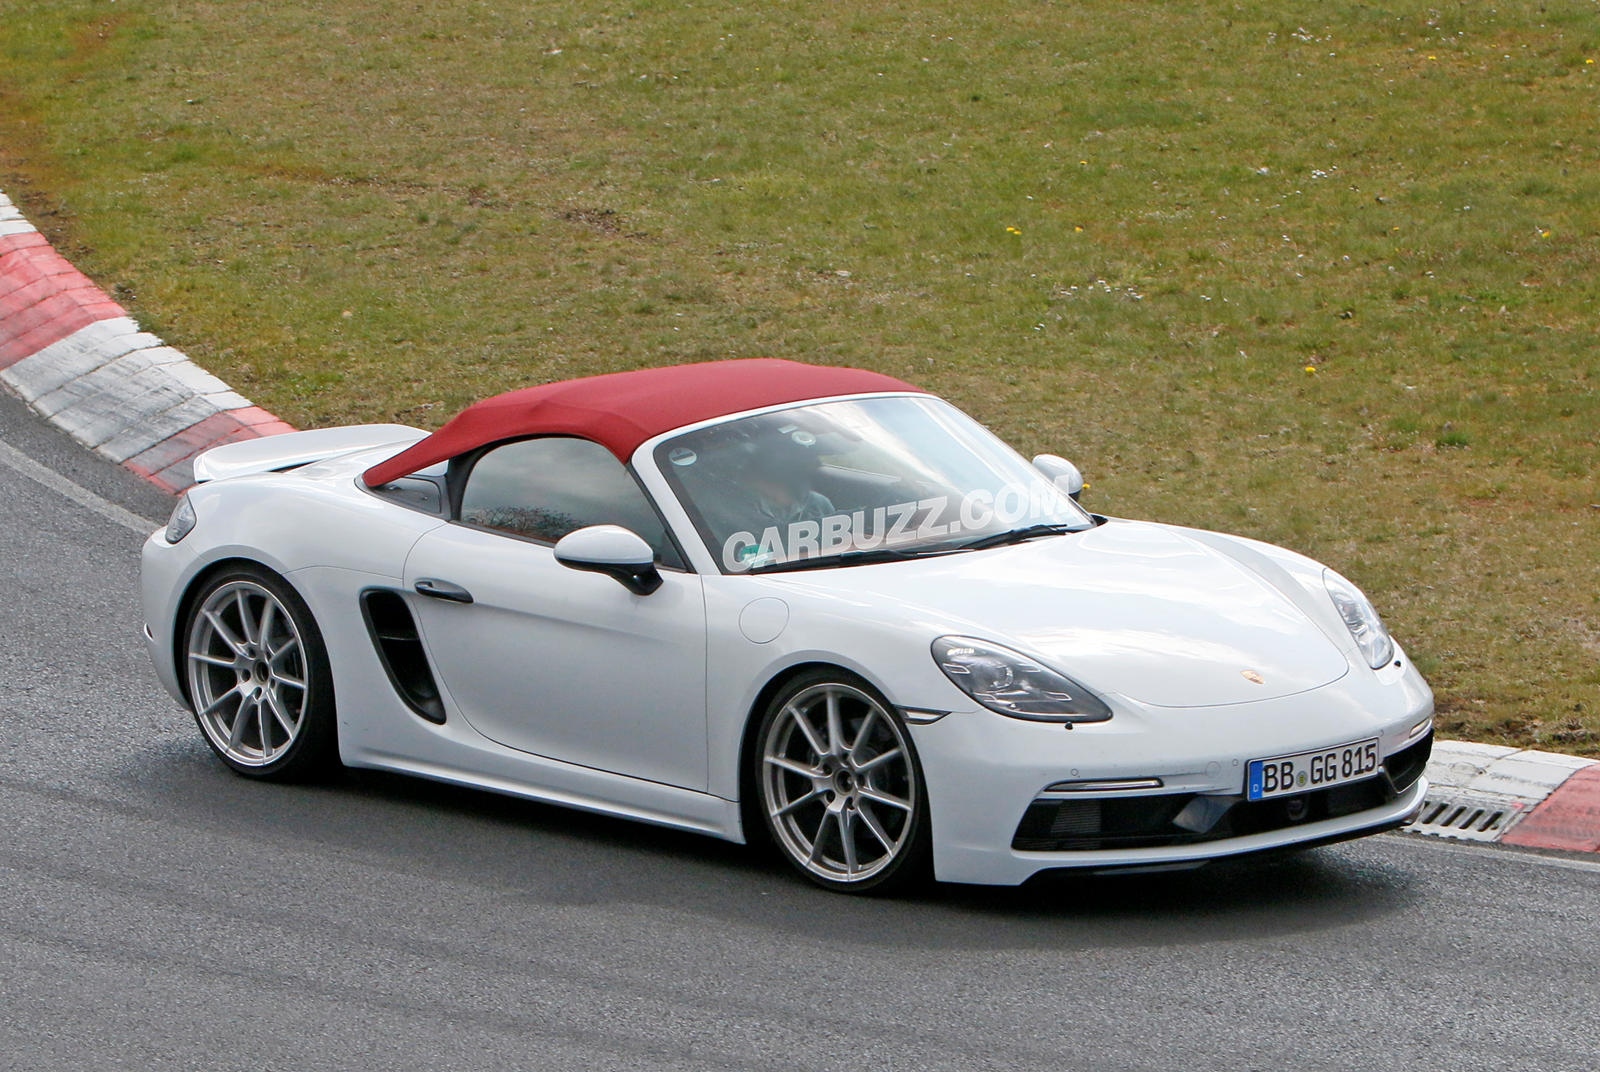 Is Porsche Ready To Offer An Entry-Level 718 Spyder? | CarBuzz